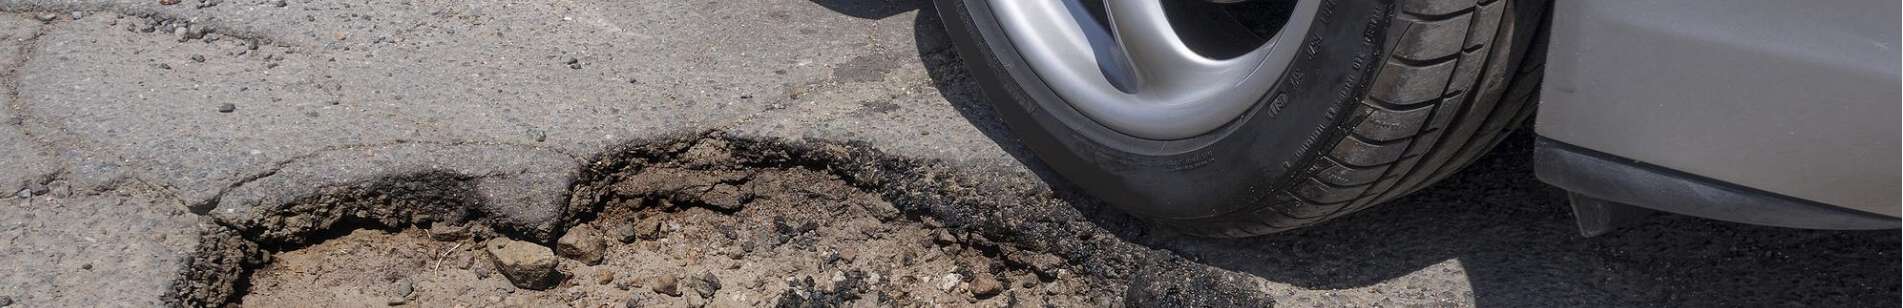 A car drives around a pothole on the road.